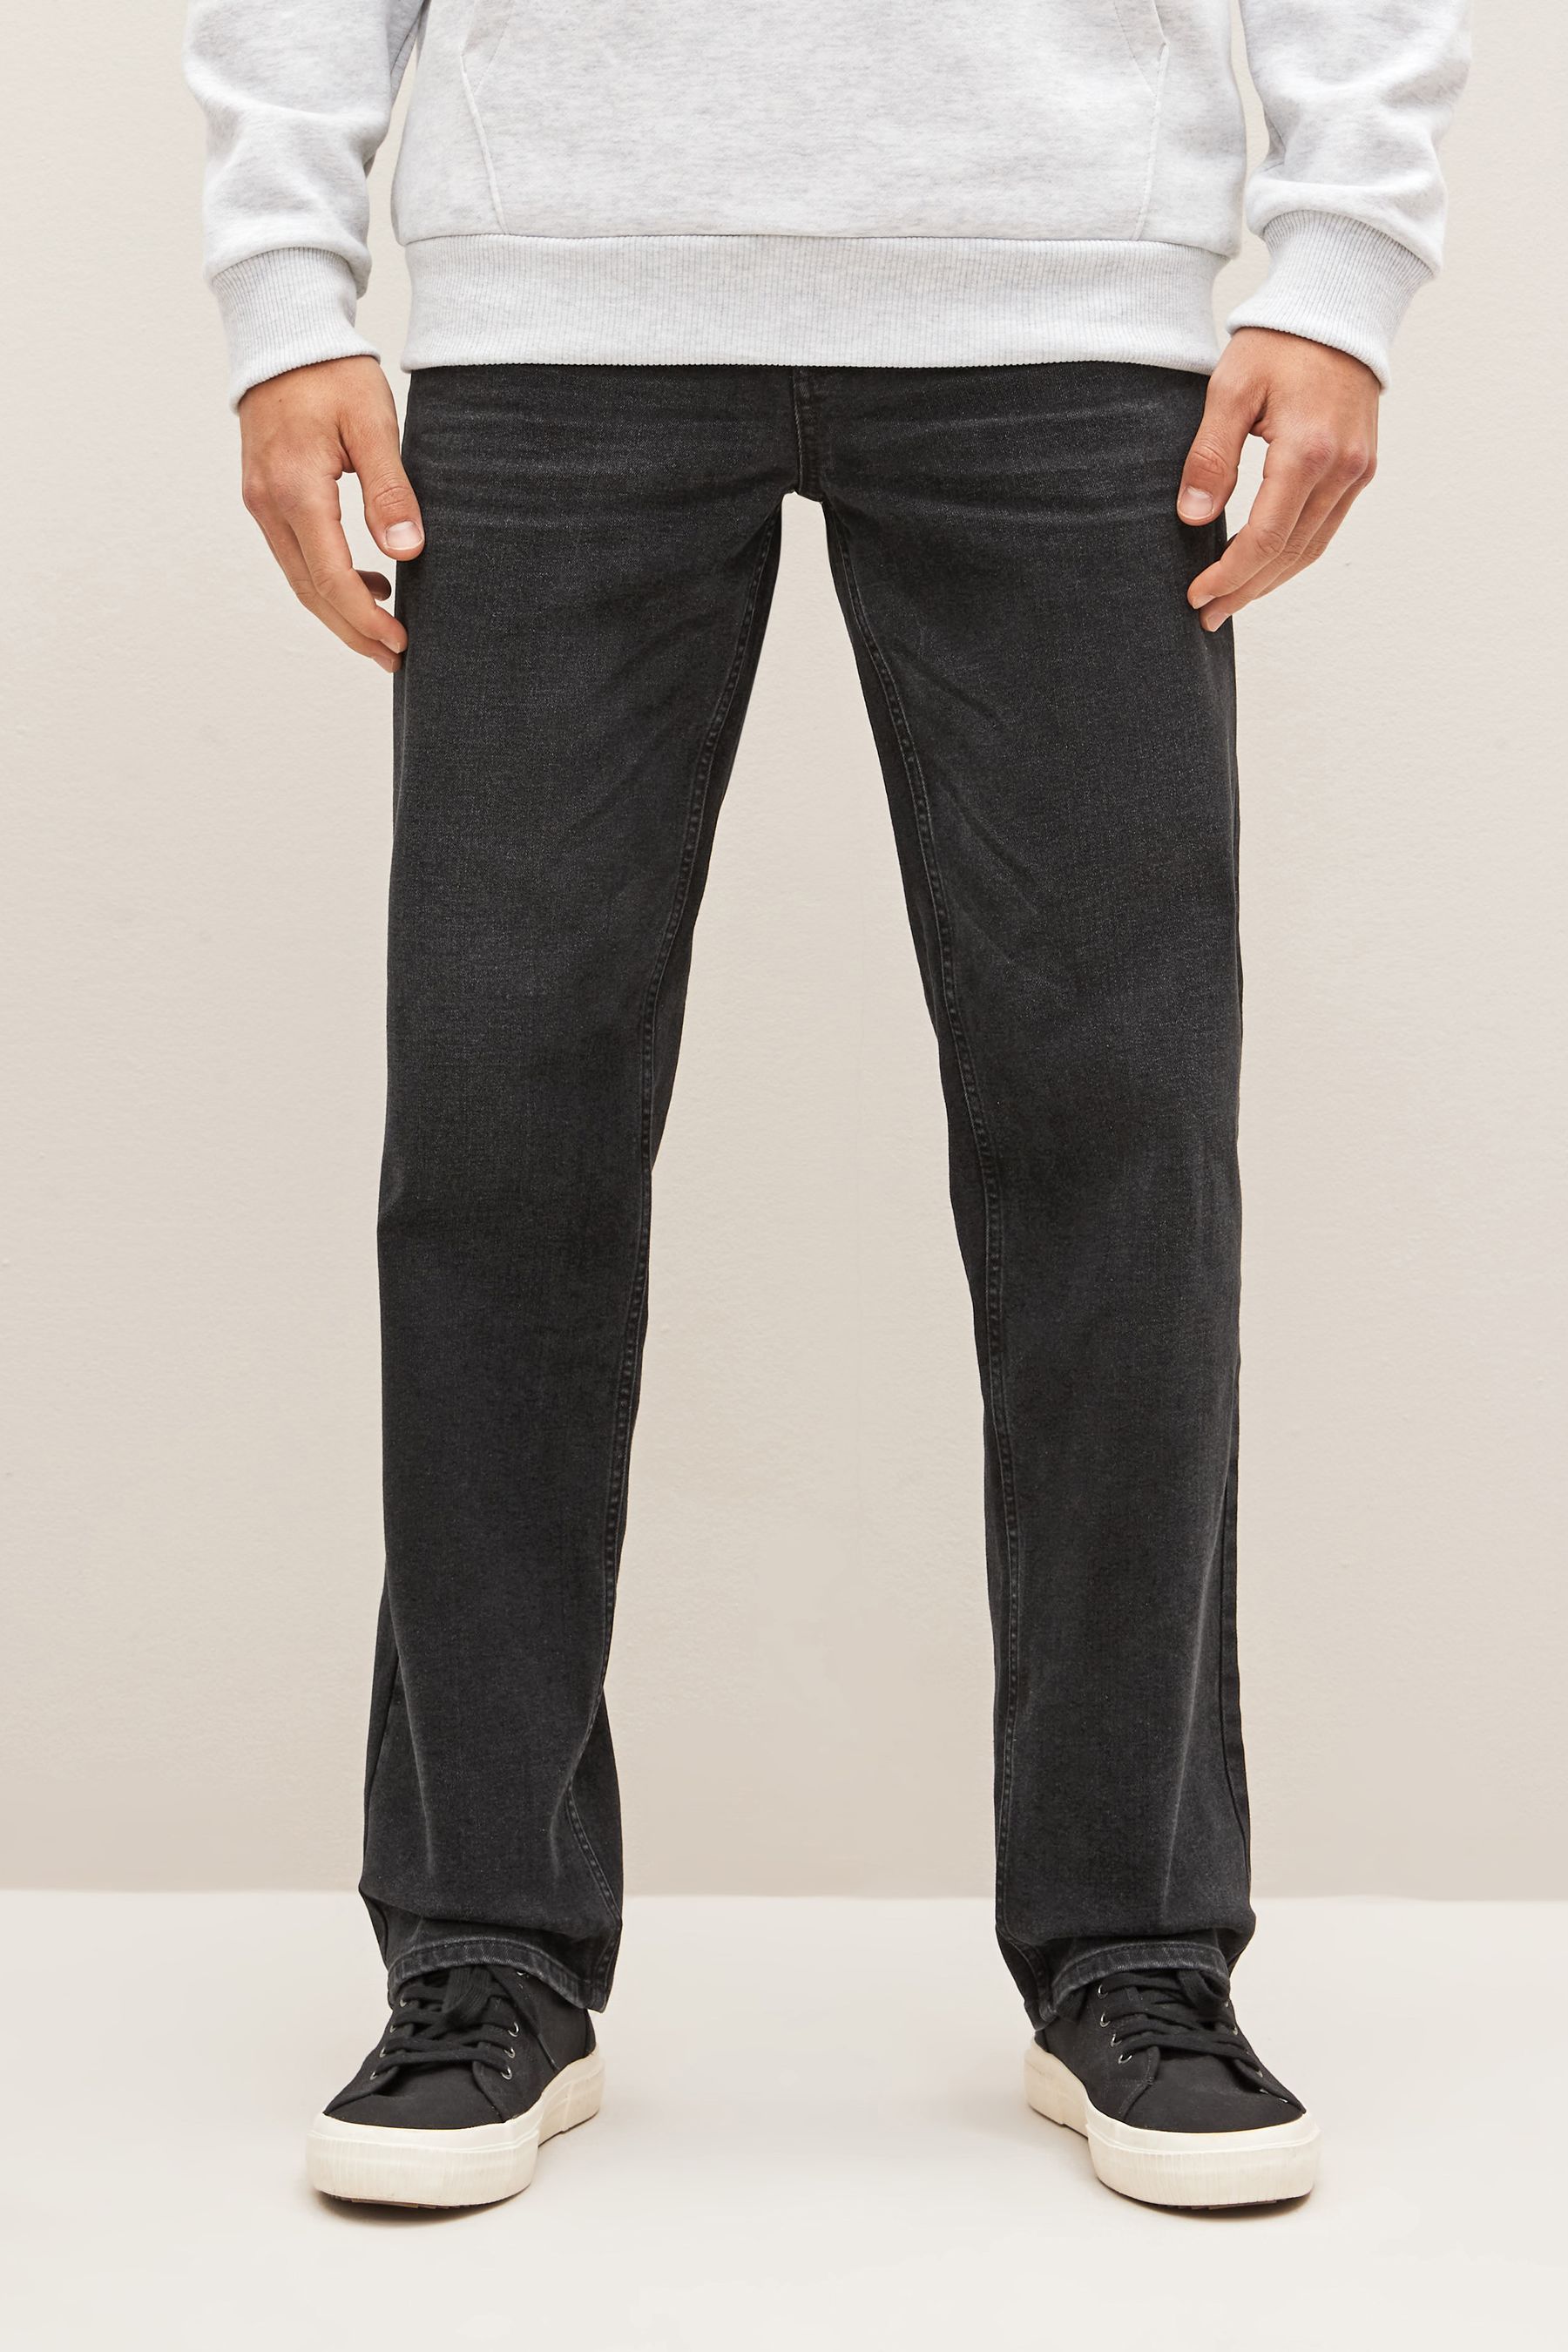 Buy Black Straight Essential Stretch Jeans from the Next UK online shop